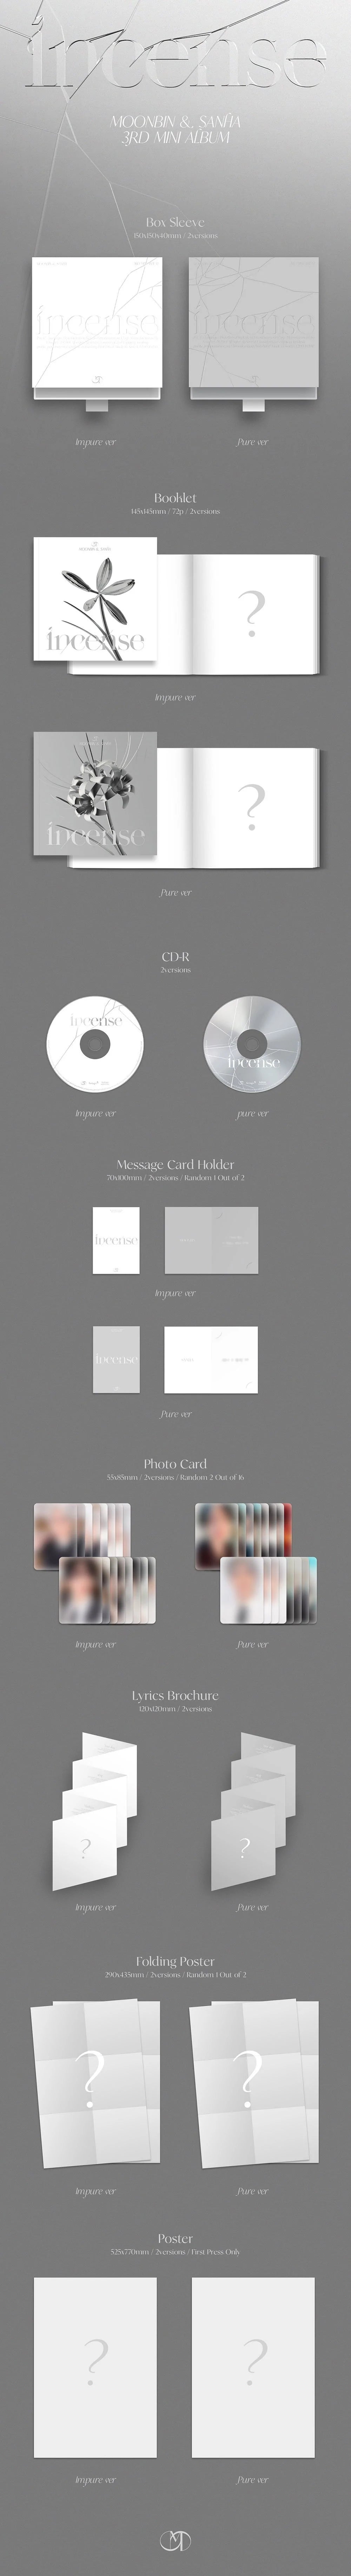 MOONBIN&SANHA (ASTRO) - 3RD MINI ALBUM [INCENSE] + (2PCS PHOTOCARDS FOR PREORDER ONLY) Infographic